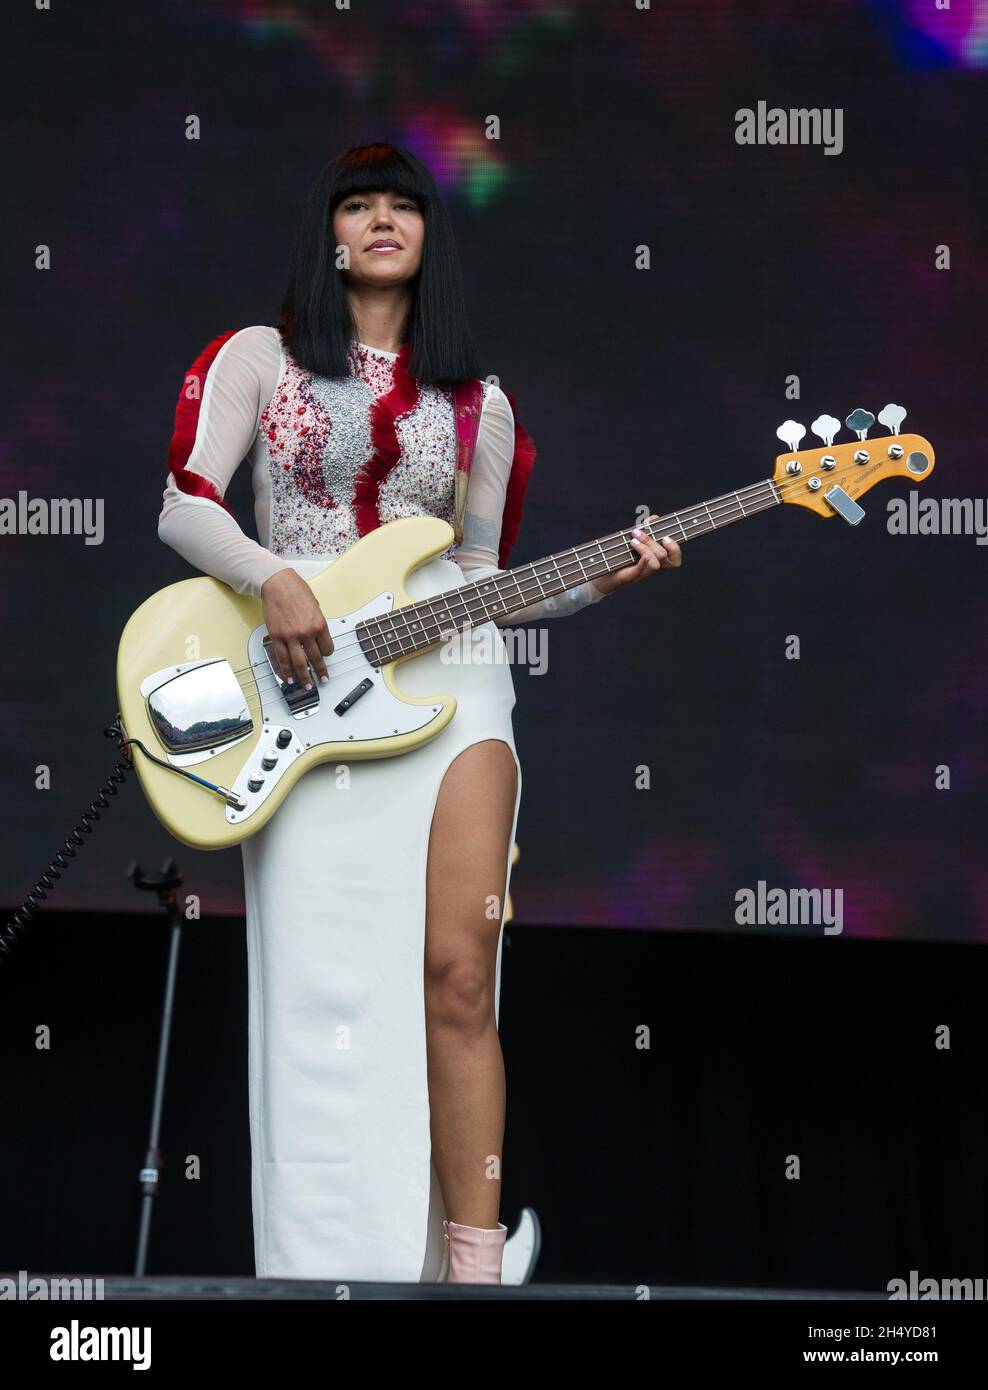 Laura Lee of Khruangbin performs live on stage on day 3 of All Points East festival in Victoria Park on May 27, 2018 in London, England. Picture date: Sunday 27 May, 2018. Photo credit: Katja Ogrin/ EMPICS Entertainment. Stock Photo